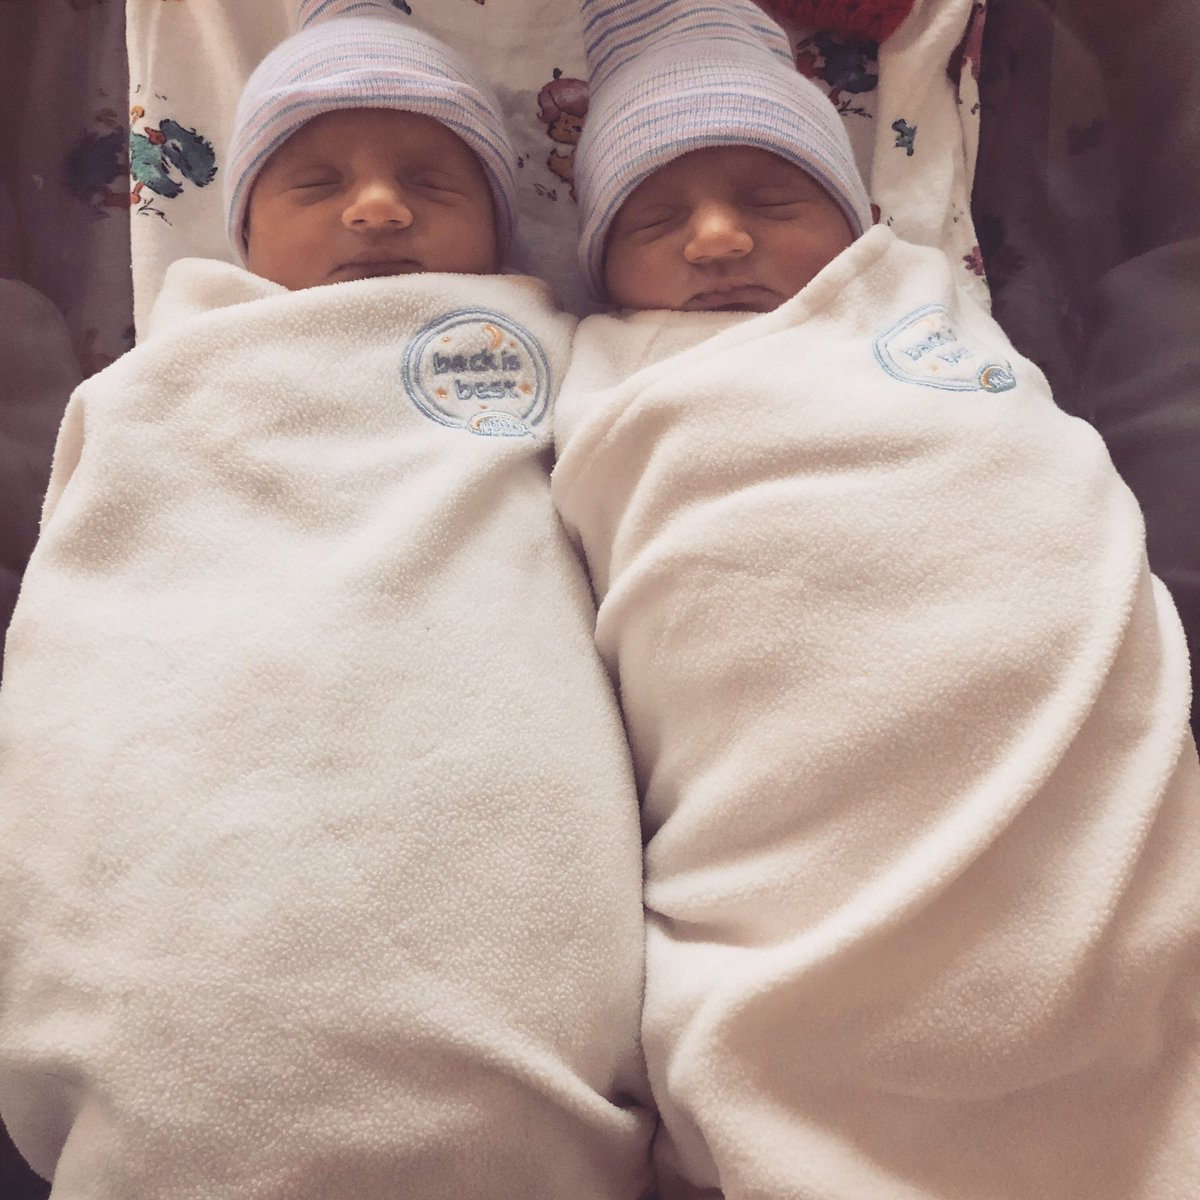 The newest and best part of mine and Kassie’s life.  World, meet Gus and Cullen.  
.
#pregnant #twins #welcometotheworld #adventuresofCullenandGus